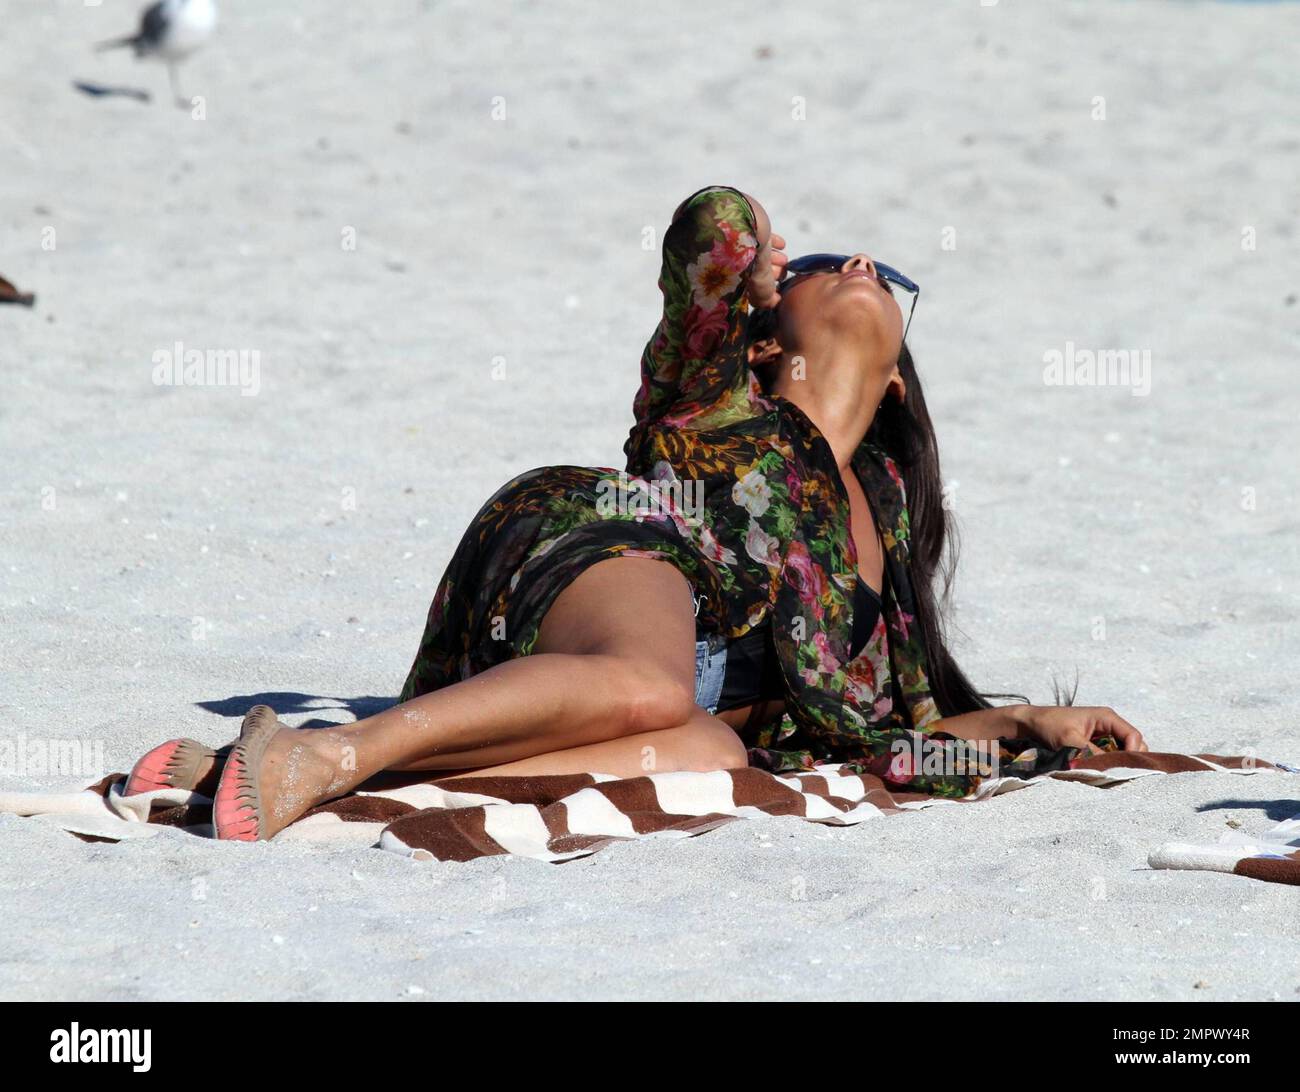 British songbird, Alesha Dixon, enjoys some relaxation beachside with pals following the filming of her new music video 